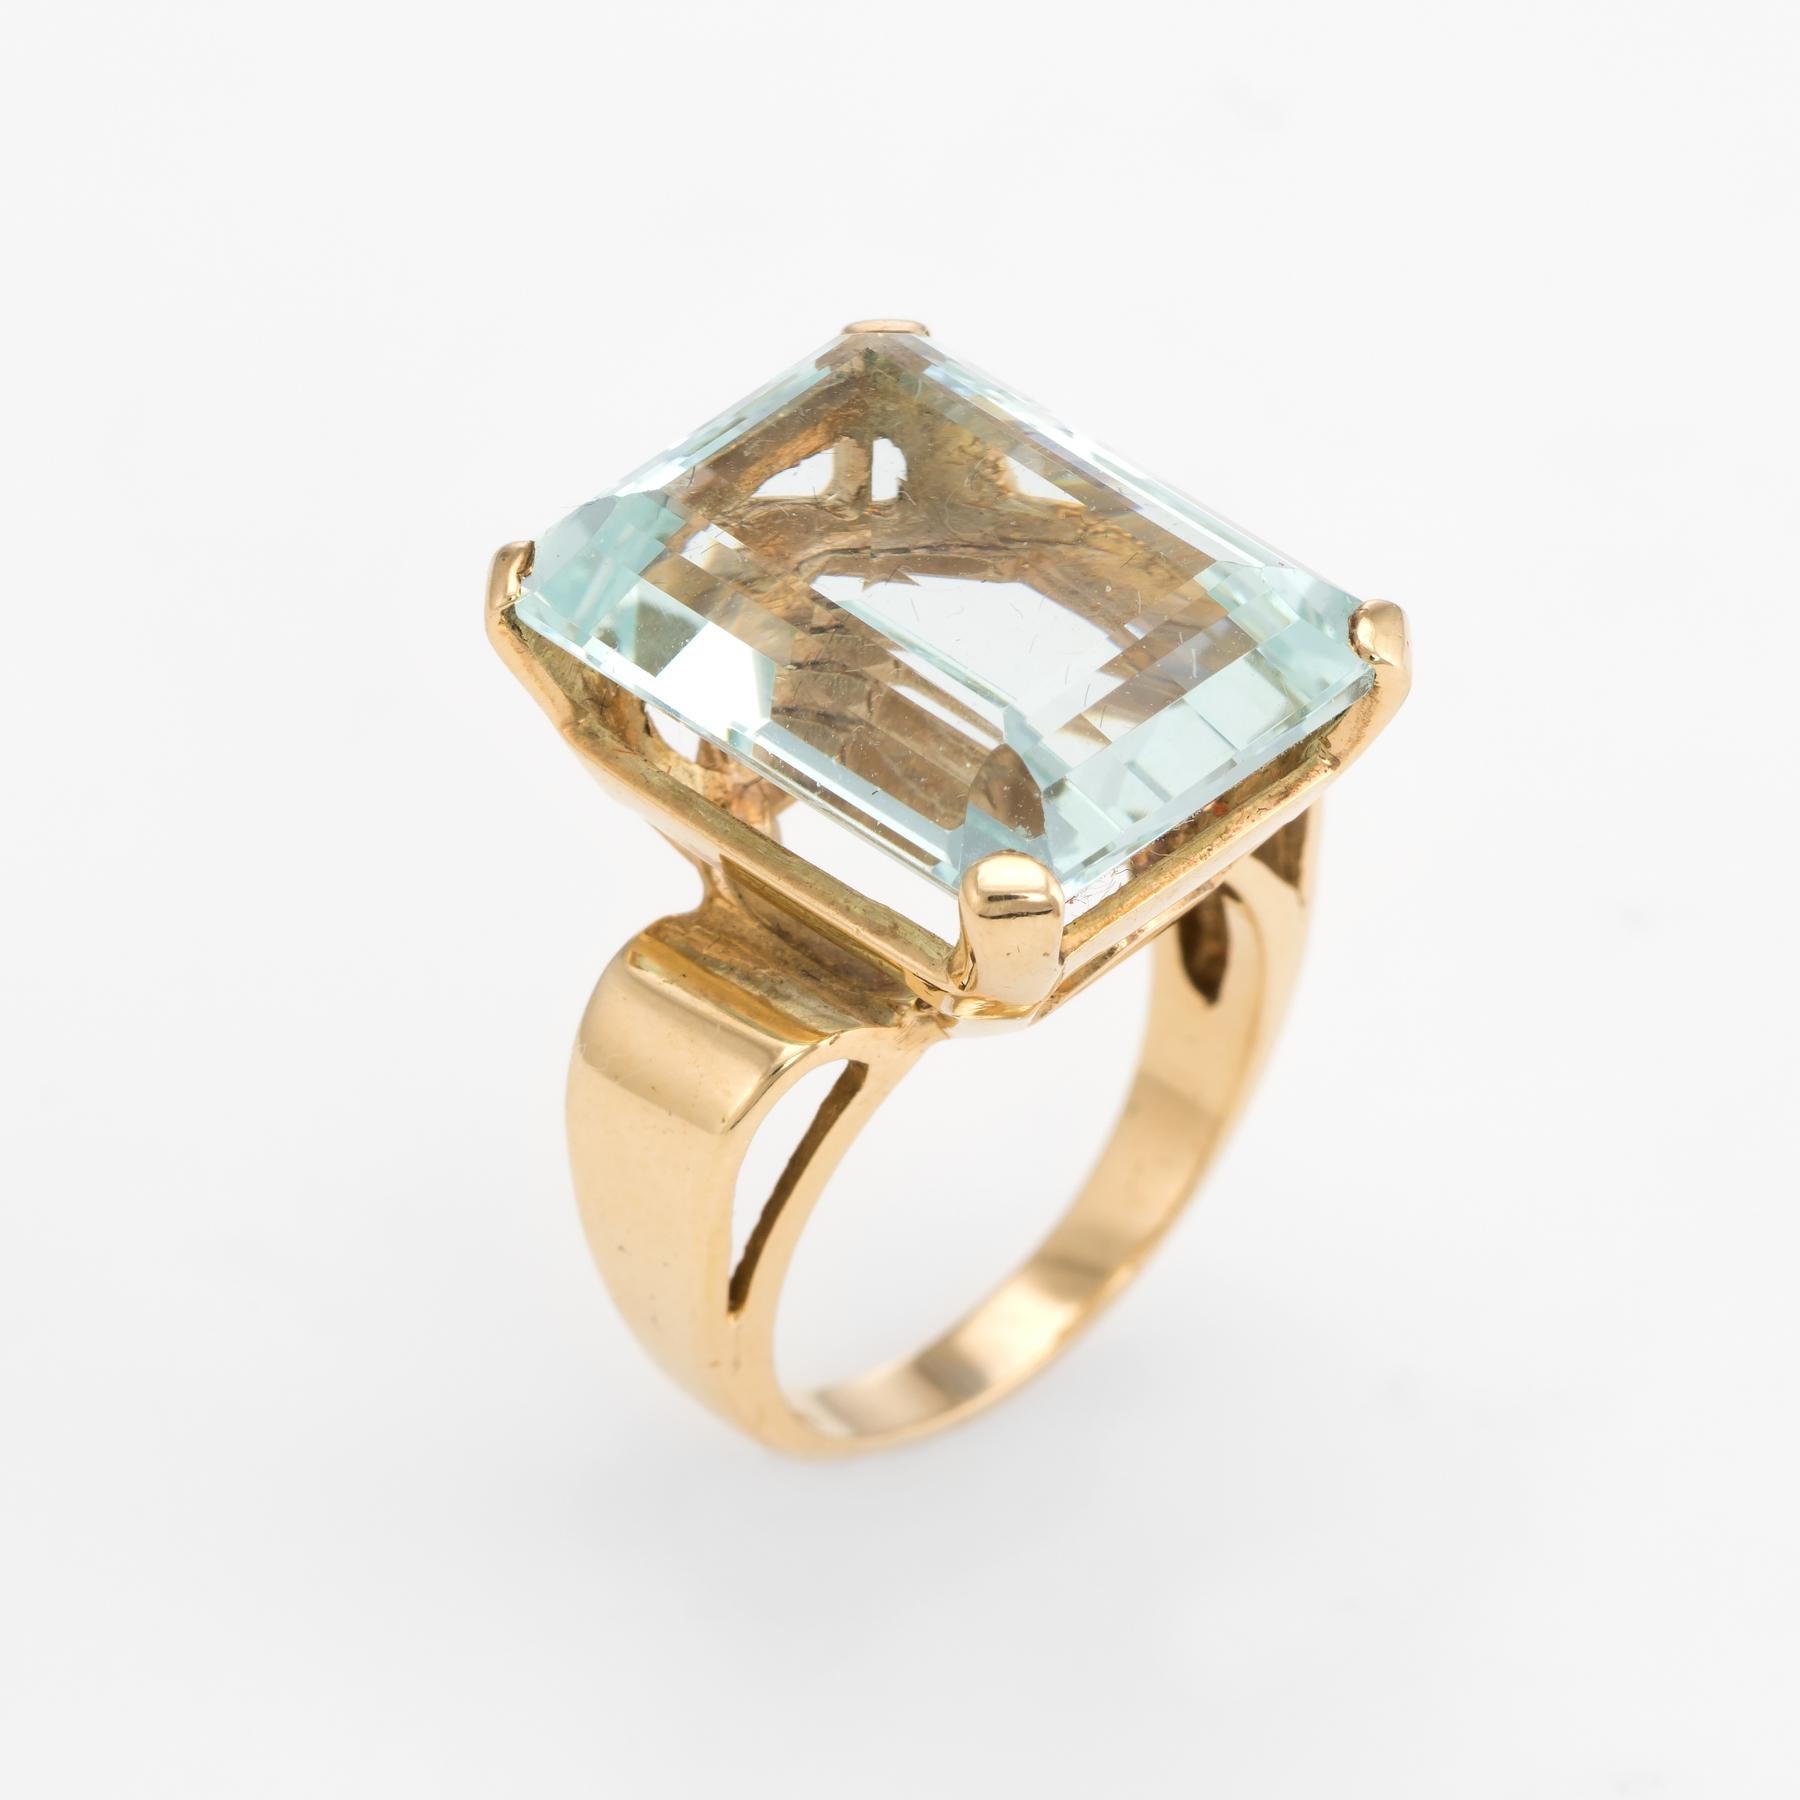 Elegant vintage aquamarine cocktail ring (circa 1970s to 1980s), crafted in 14 karat yellow gold. 

Centrally mounted emerald cut aquamarine measures 18mm x 13mm (estimated at 17 carats). The aquamarine is in excellent condition and free of cracks